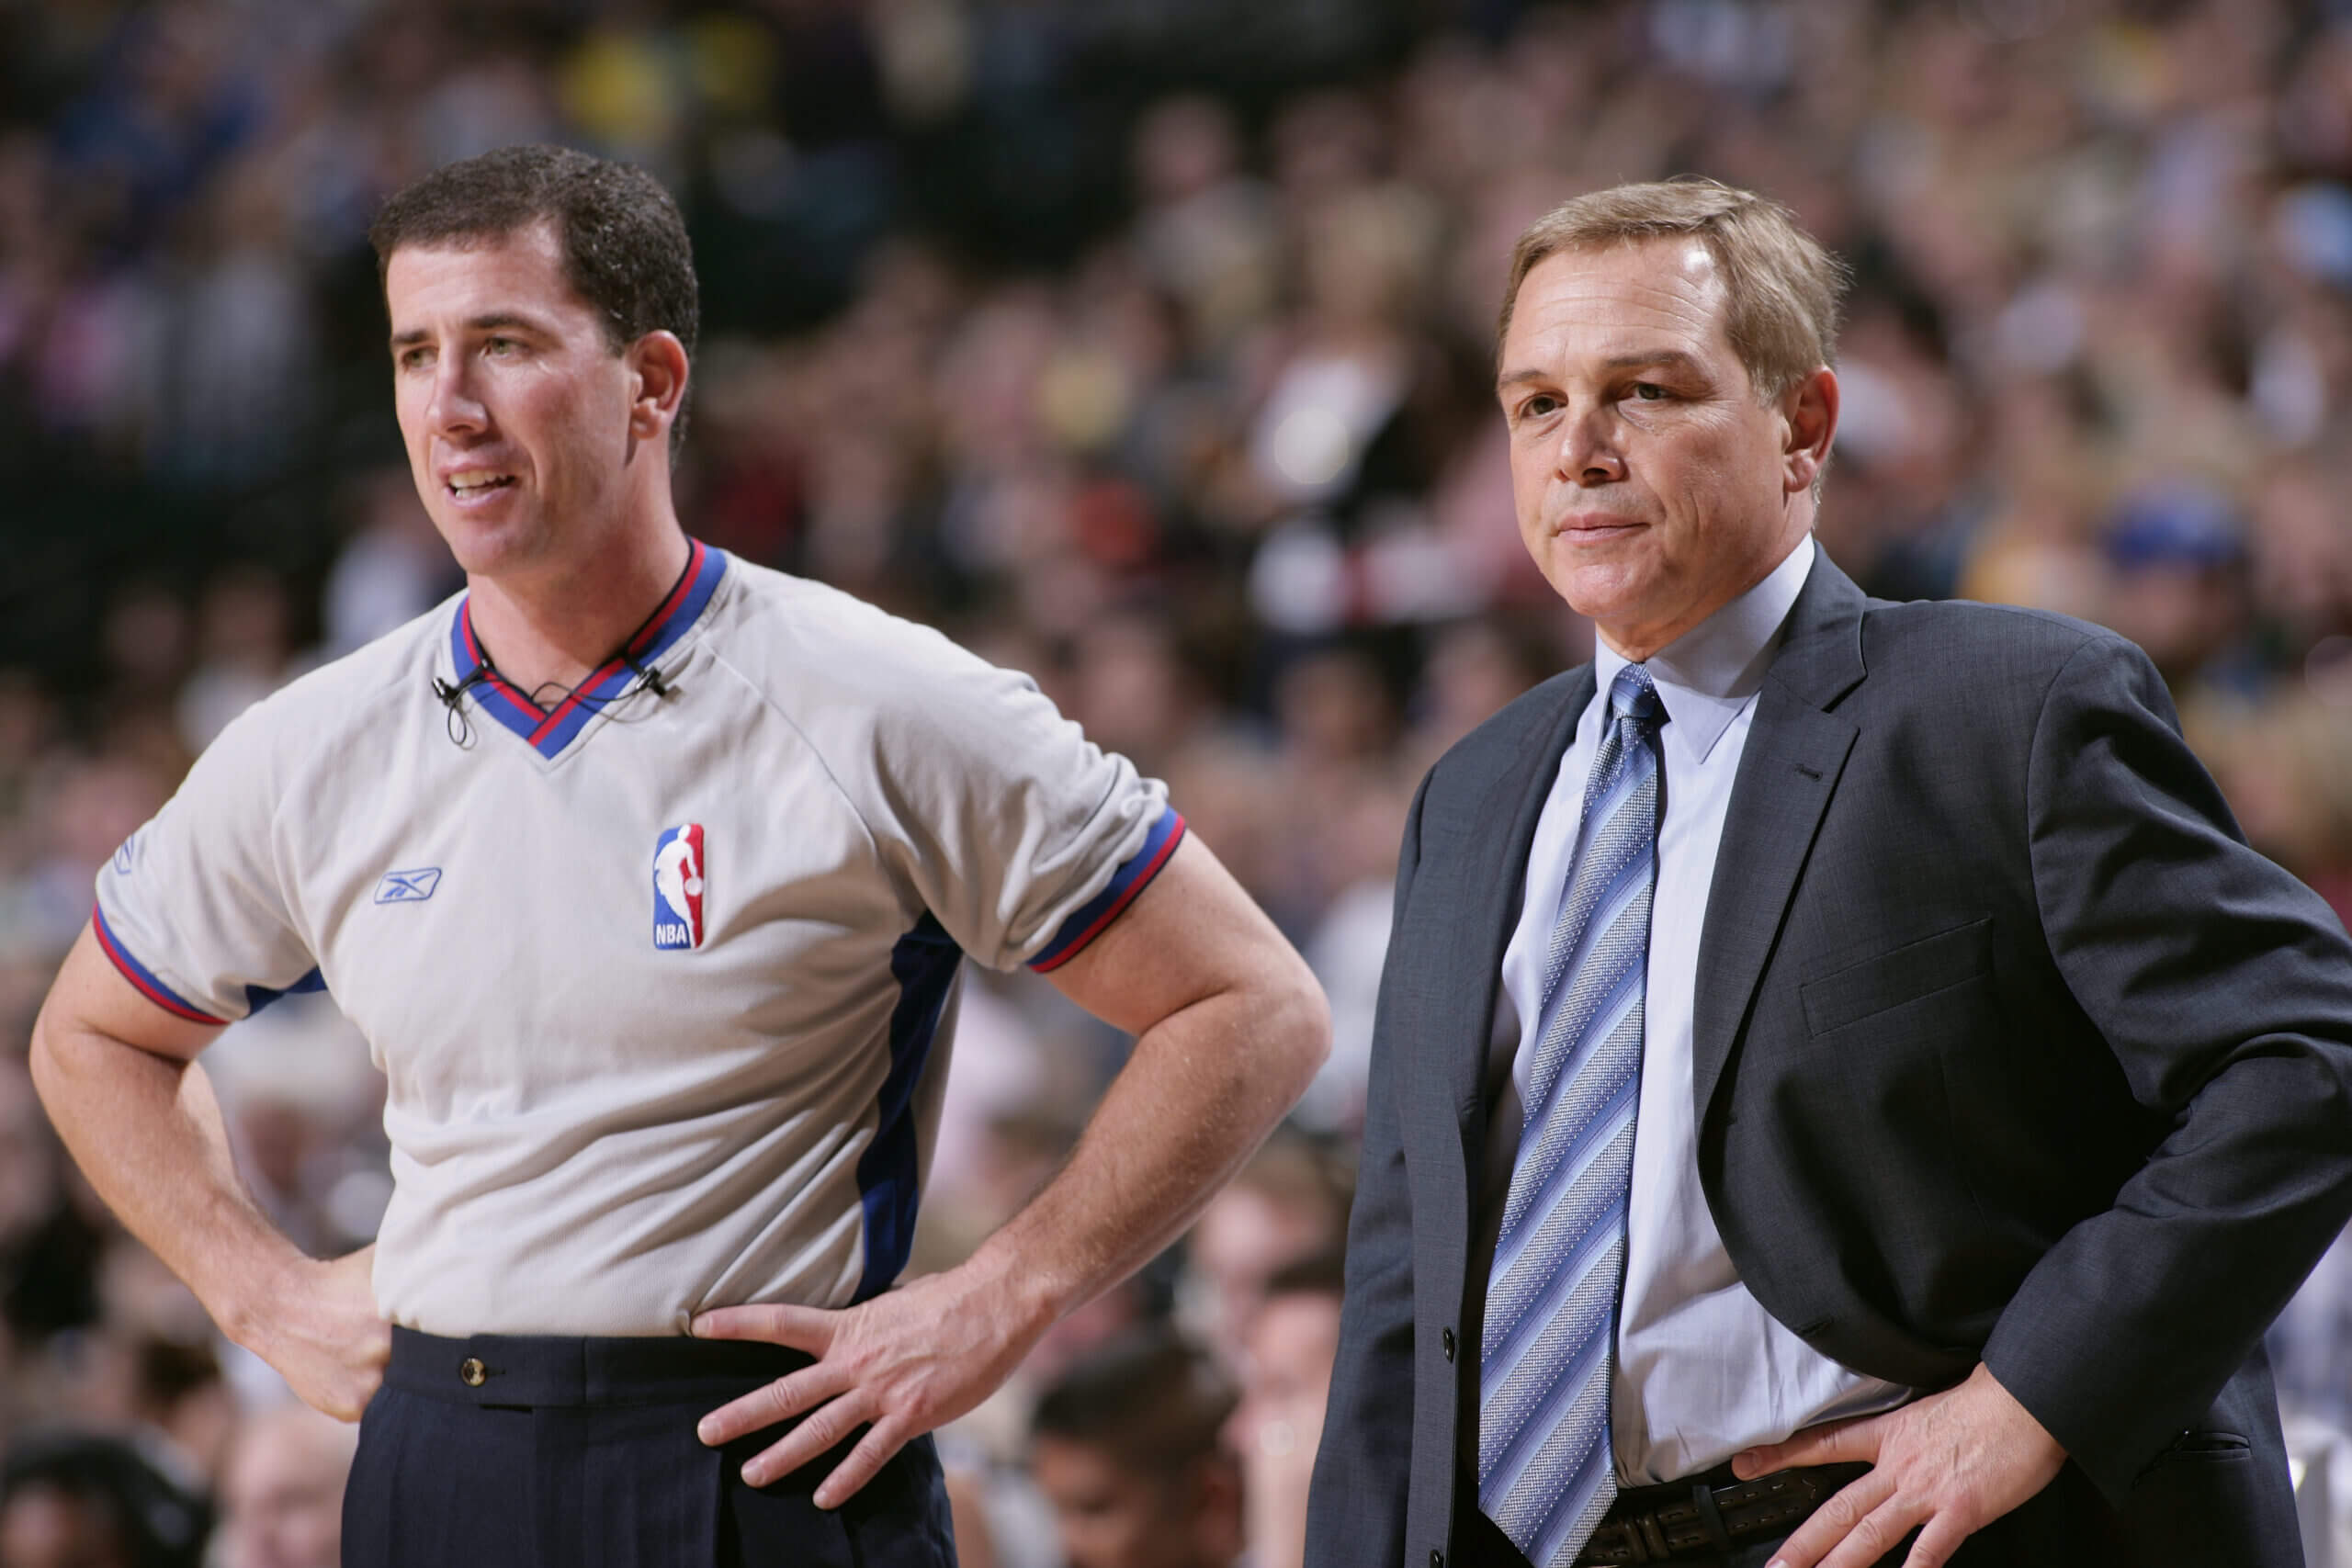 Tim Donaghy 'regrets' falling out with Scott Foster